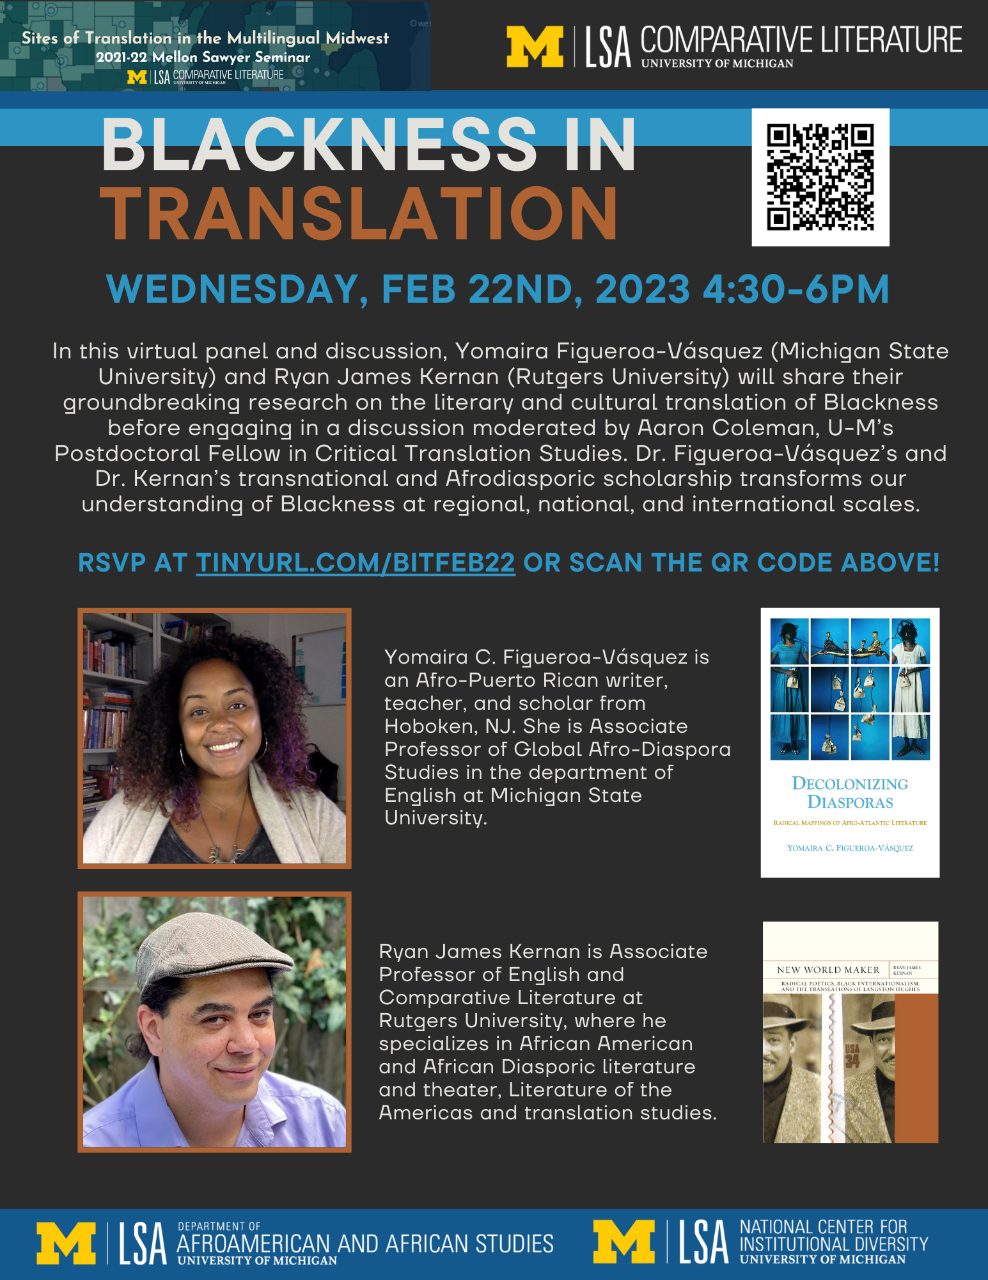 Text, “Blackness in Translation, Wednesday, February 22nd, 2023 4:30-6PM. In this virtual panel and discussion, Yomaira Figueroa-Vásquez (Michigan State University) and Ryan James Kernan (Rutgers University) will share their groundbreaking research on the literary and cultural translation of Blackness before engaging in a discussion moderated by Aaron Coleman, U-M’s Postdoctoral Fellow in Critical Translation Studies. Dr. Figueroa-Vásquez’s and Dr. Kernan’s transnational and Afrodiasporic scholarship transforms our understanding of Blackness at regional, national, and international scales. Yomaira C. Figueroa-Vásquez is an Afro-Puerto Rican writer, teacher, and scholar from Hoboken, NJ. She is Associate Professor of Global Afro-Diaspora Studies in the department of English at Michigan State University. Ryan James Kernan is Associate Professor of English and Comparative Literature at Rutgers University, where he specialized in African American and African Diasporic literature and theater, Literature of the Americas and translation studies.”